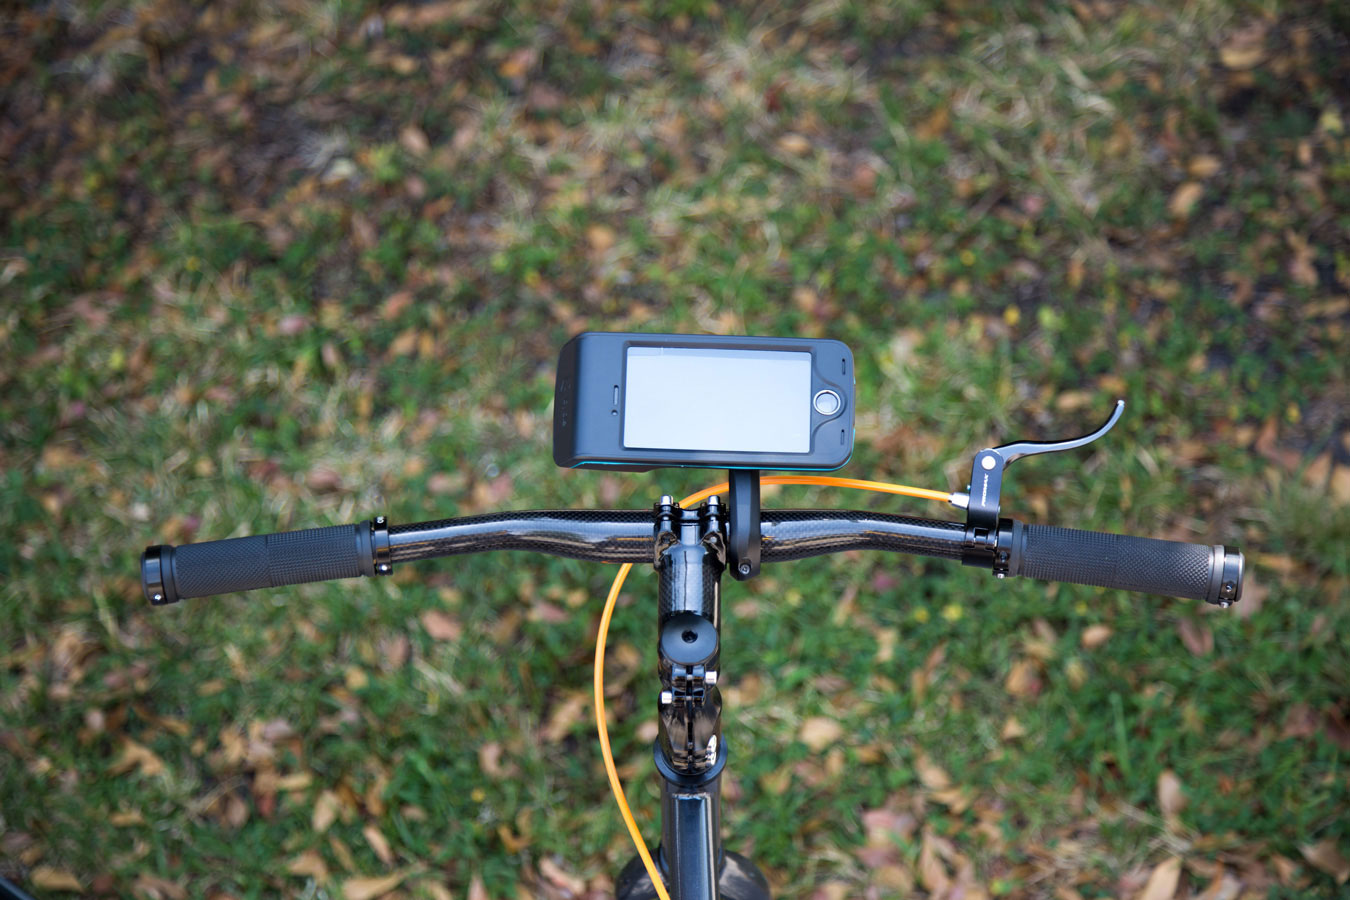 bycle case and app turns iphone into bike computer for tracking rides mount 10